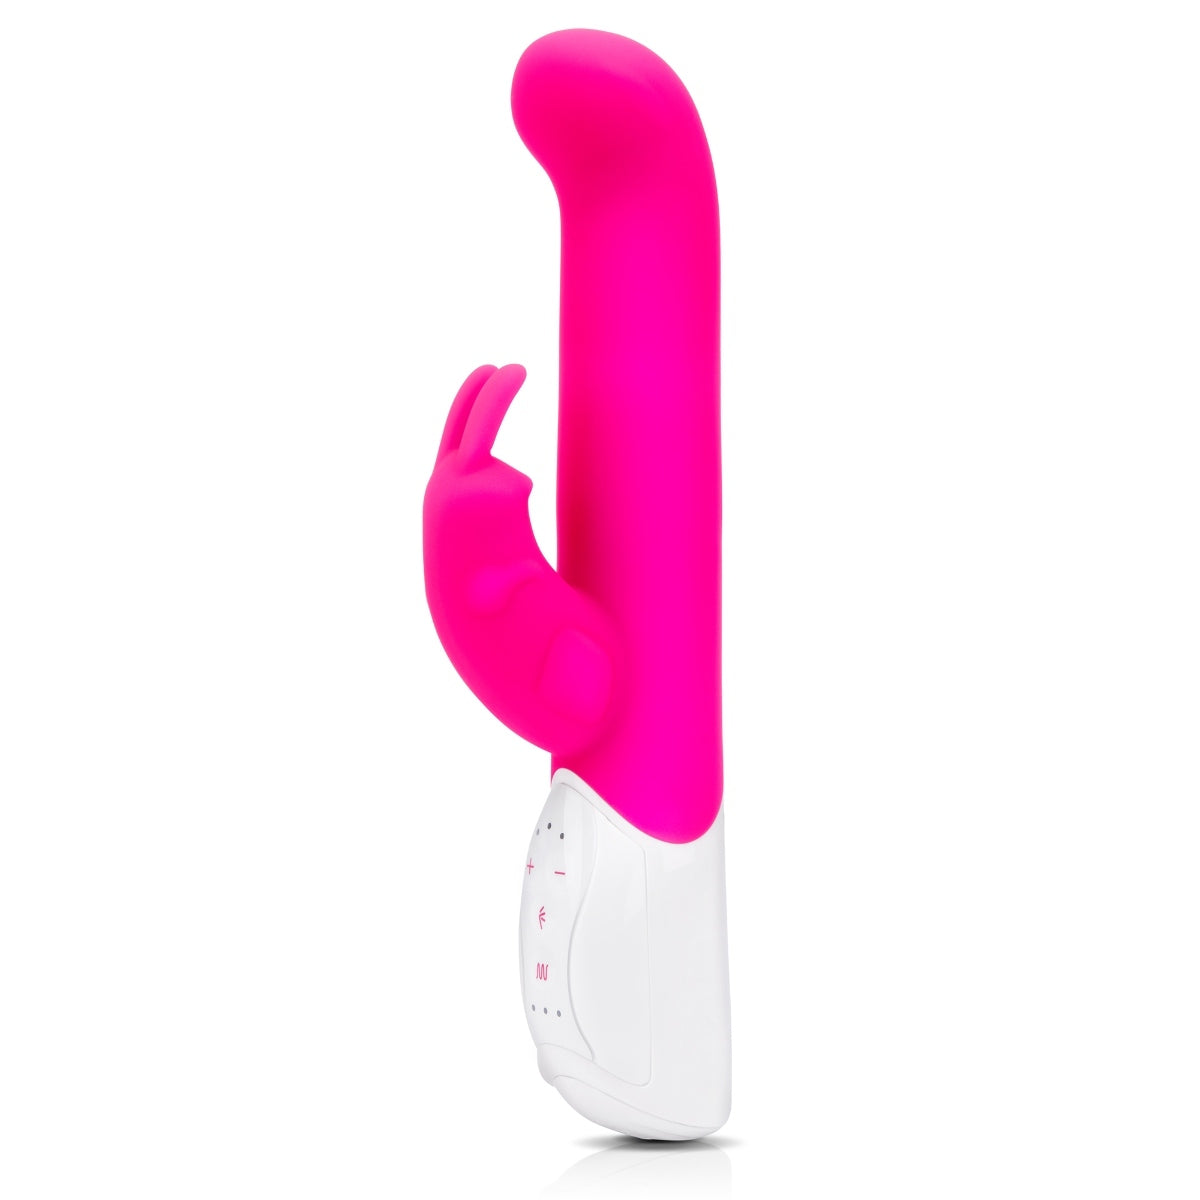 Rabbit Essentials Come Hither Rabbit Vibrator With Throbbing Shaft Hot Pink